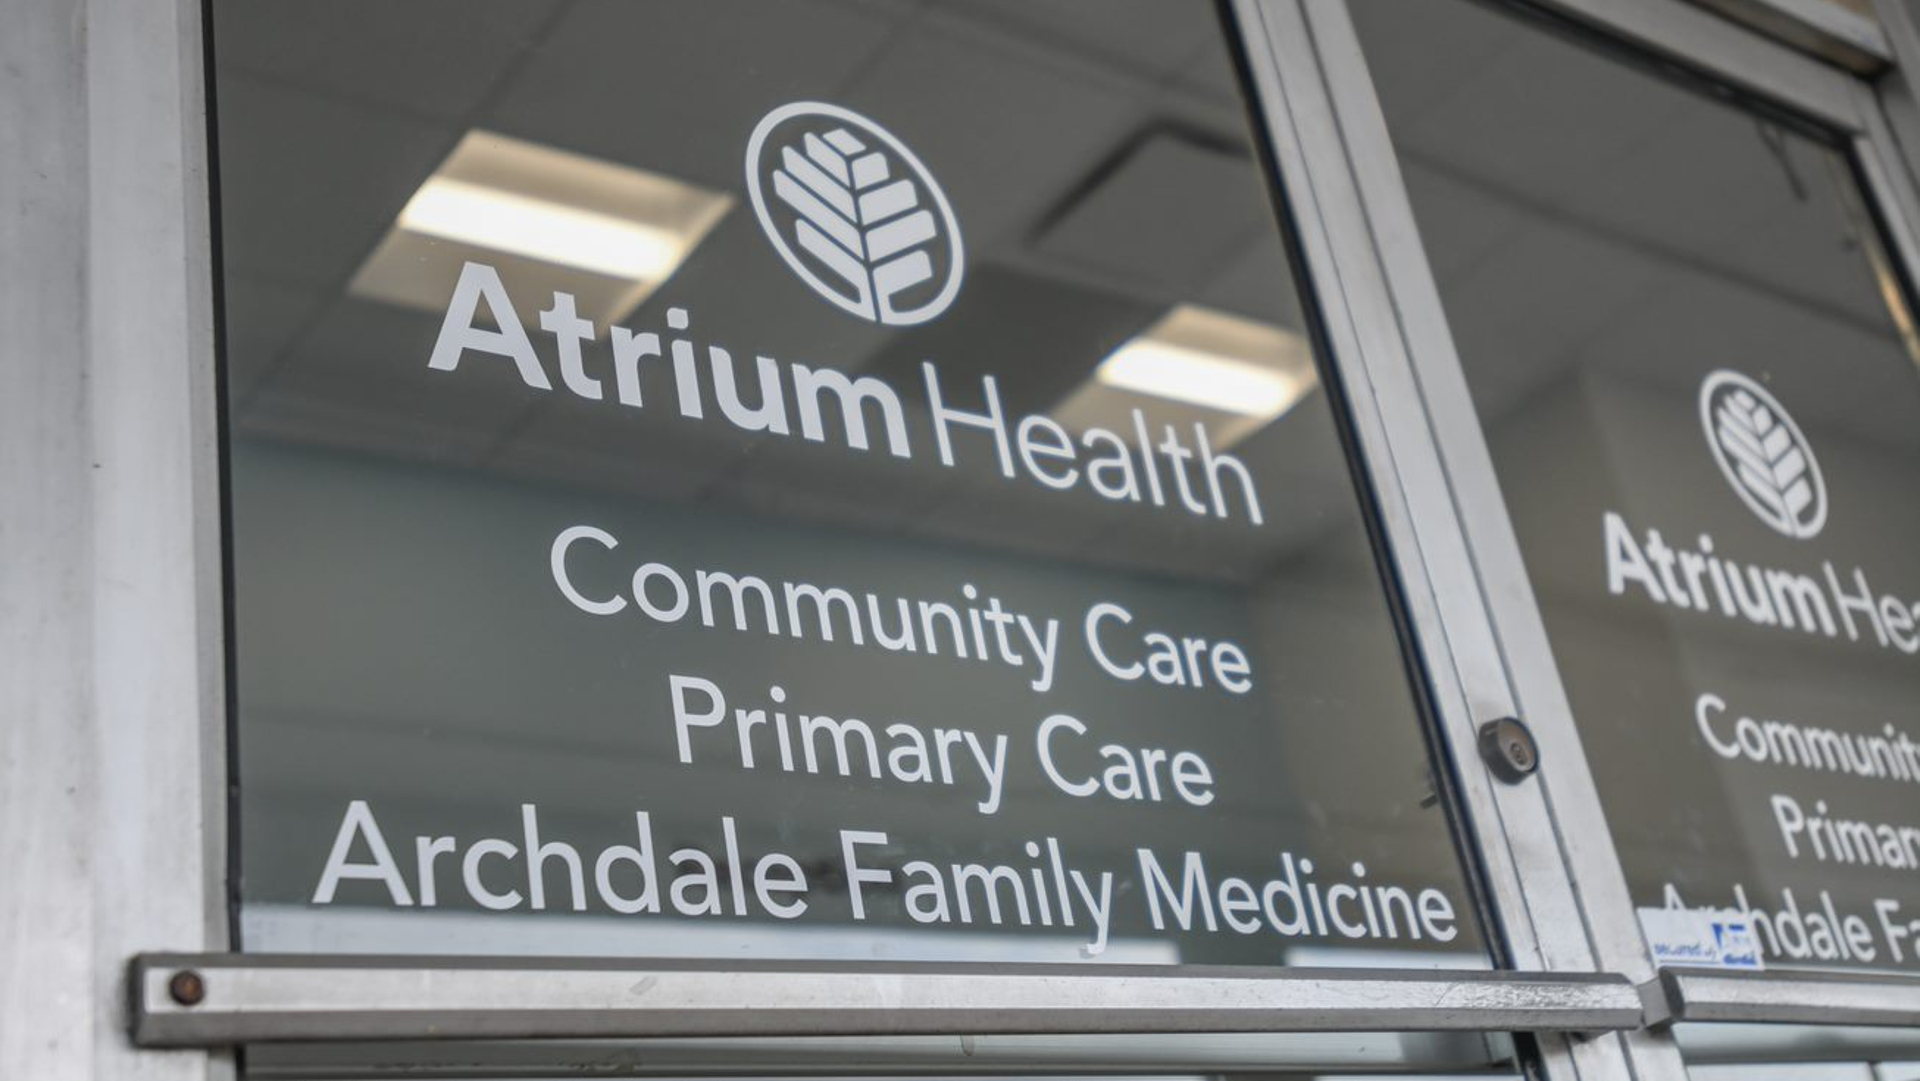 Sign of Atrium Health's newest community care practice, Atrium Health Community Care Primary Care Archdale Family Medicine